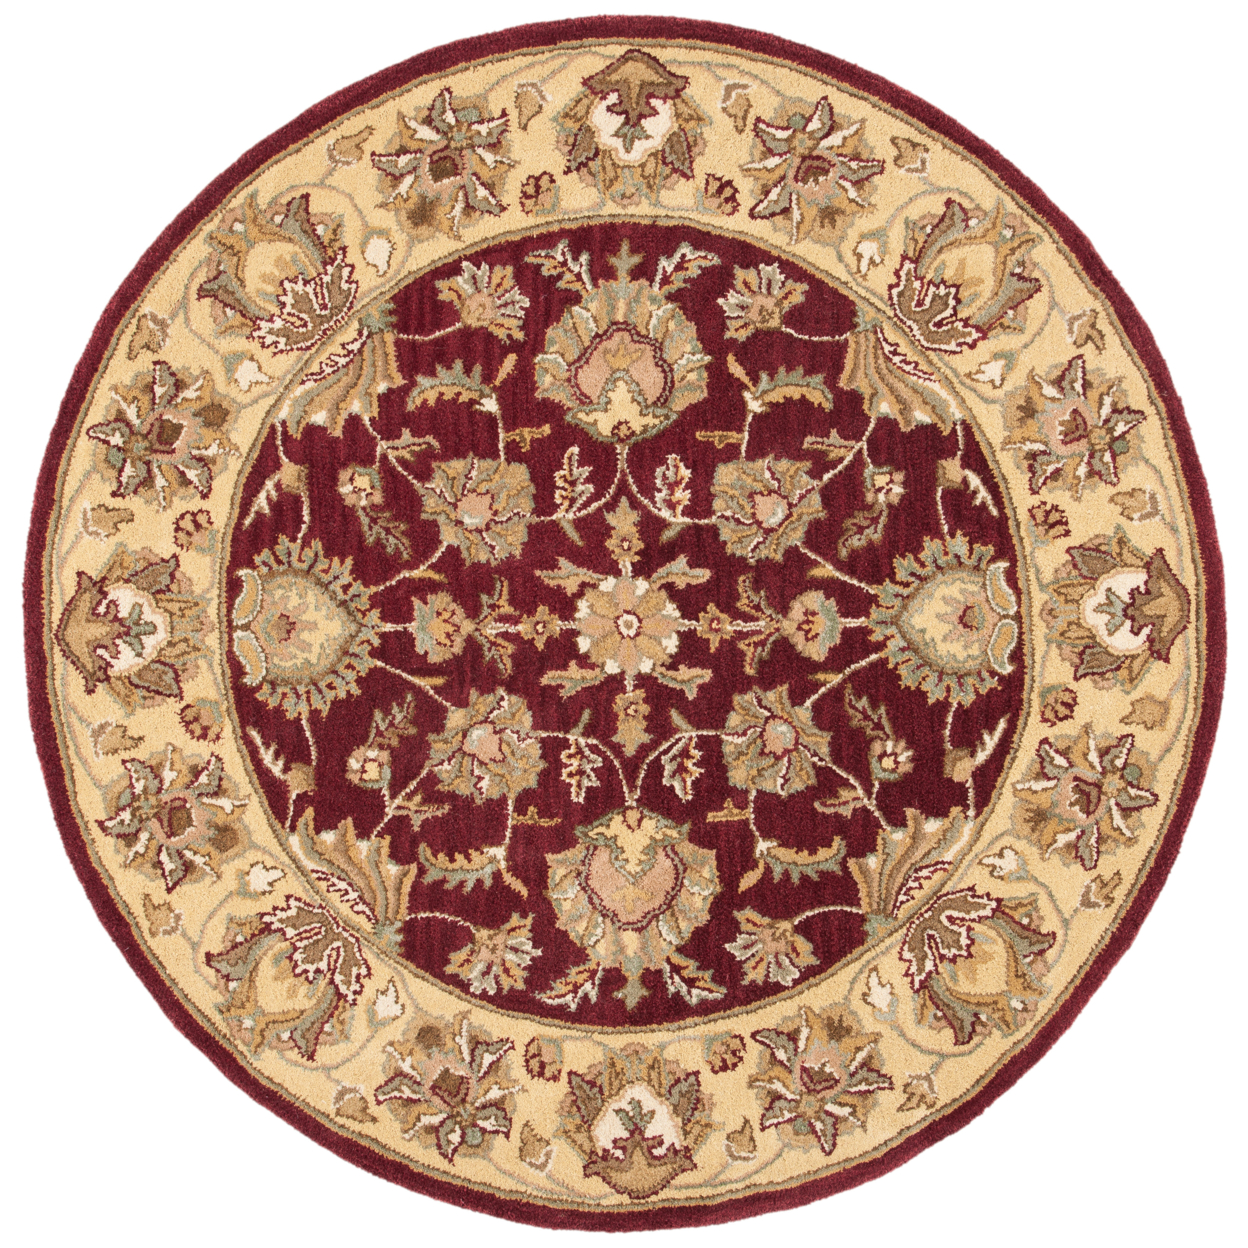 SAFAVIEH Heritage Regis Traditional Wool Area Rug, Red/Gold, 6' x 6' Round - image 1 of 9